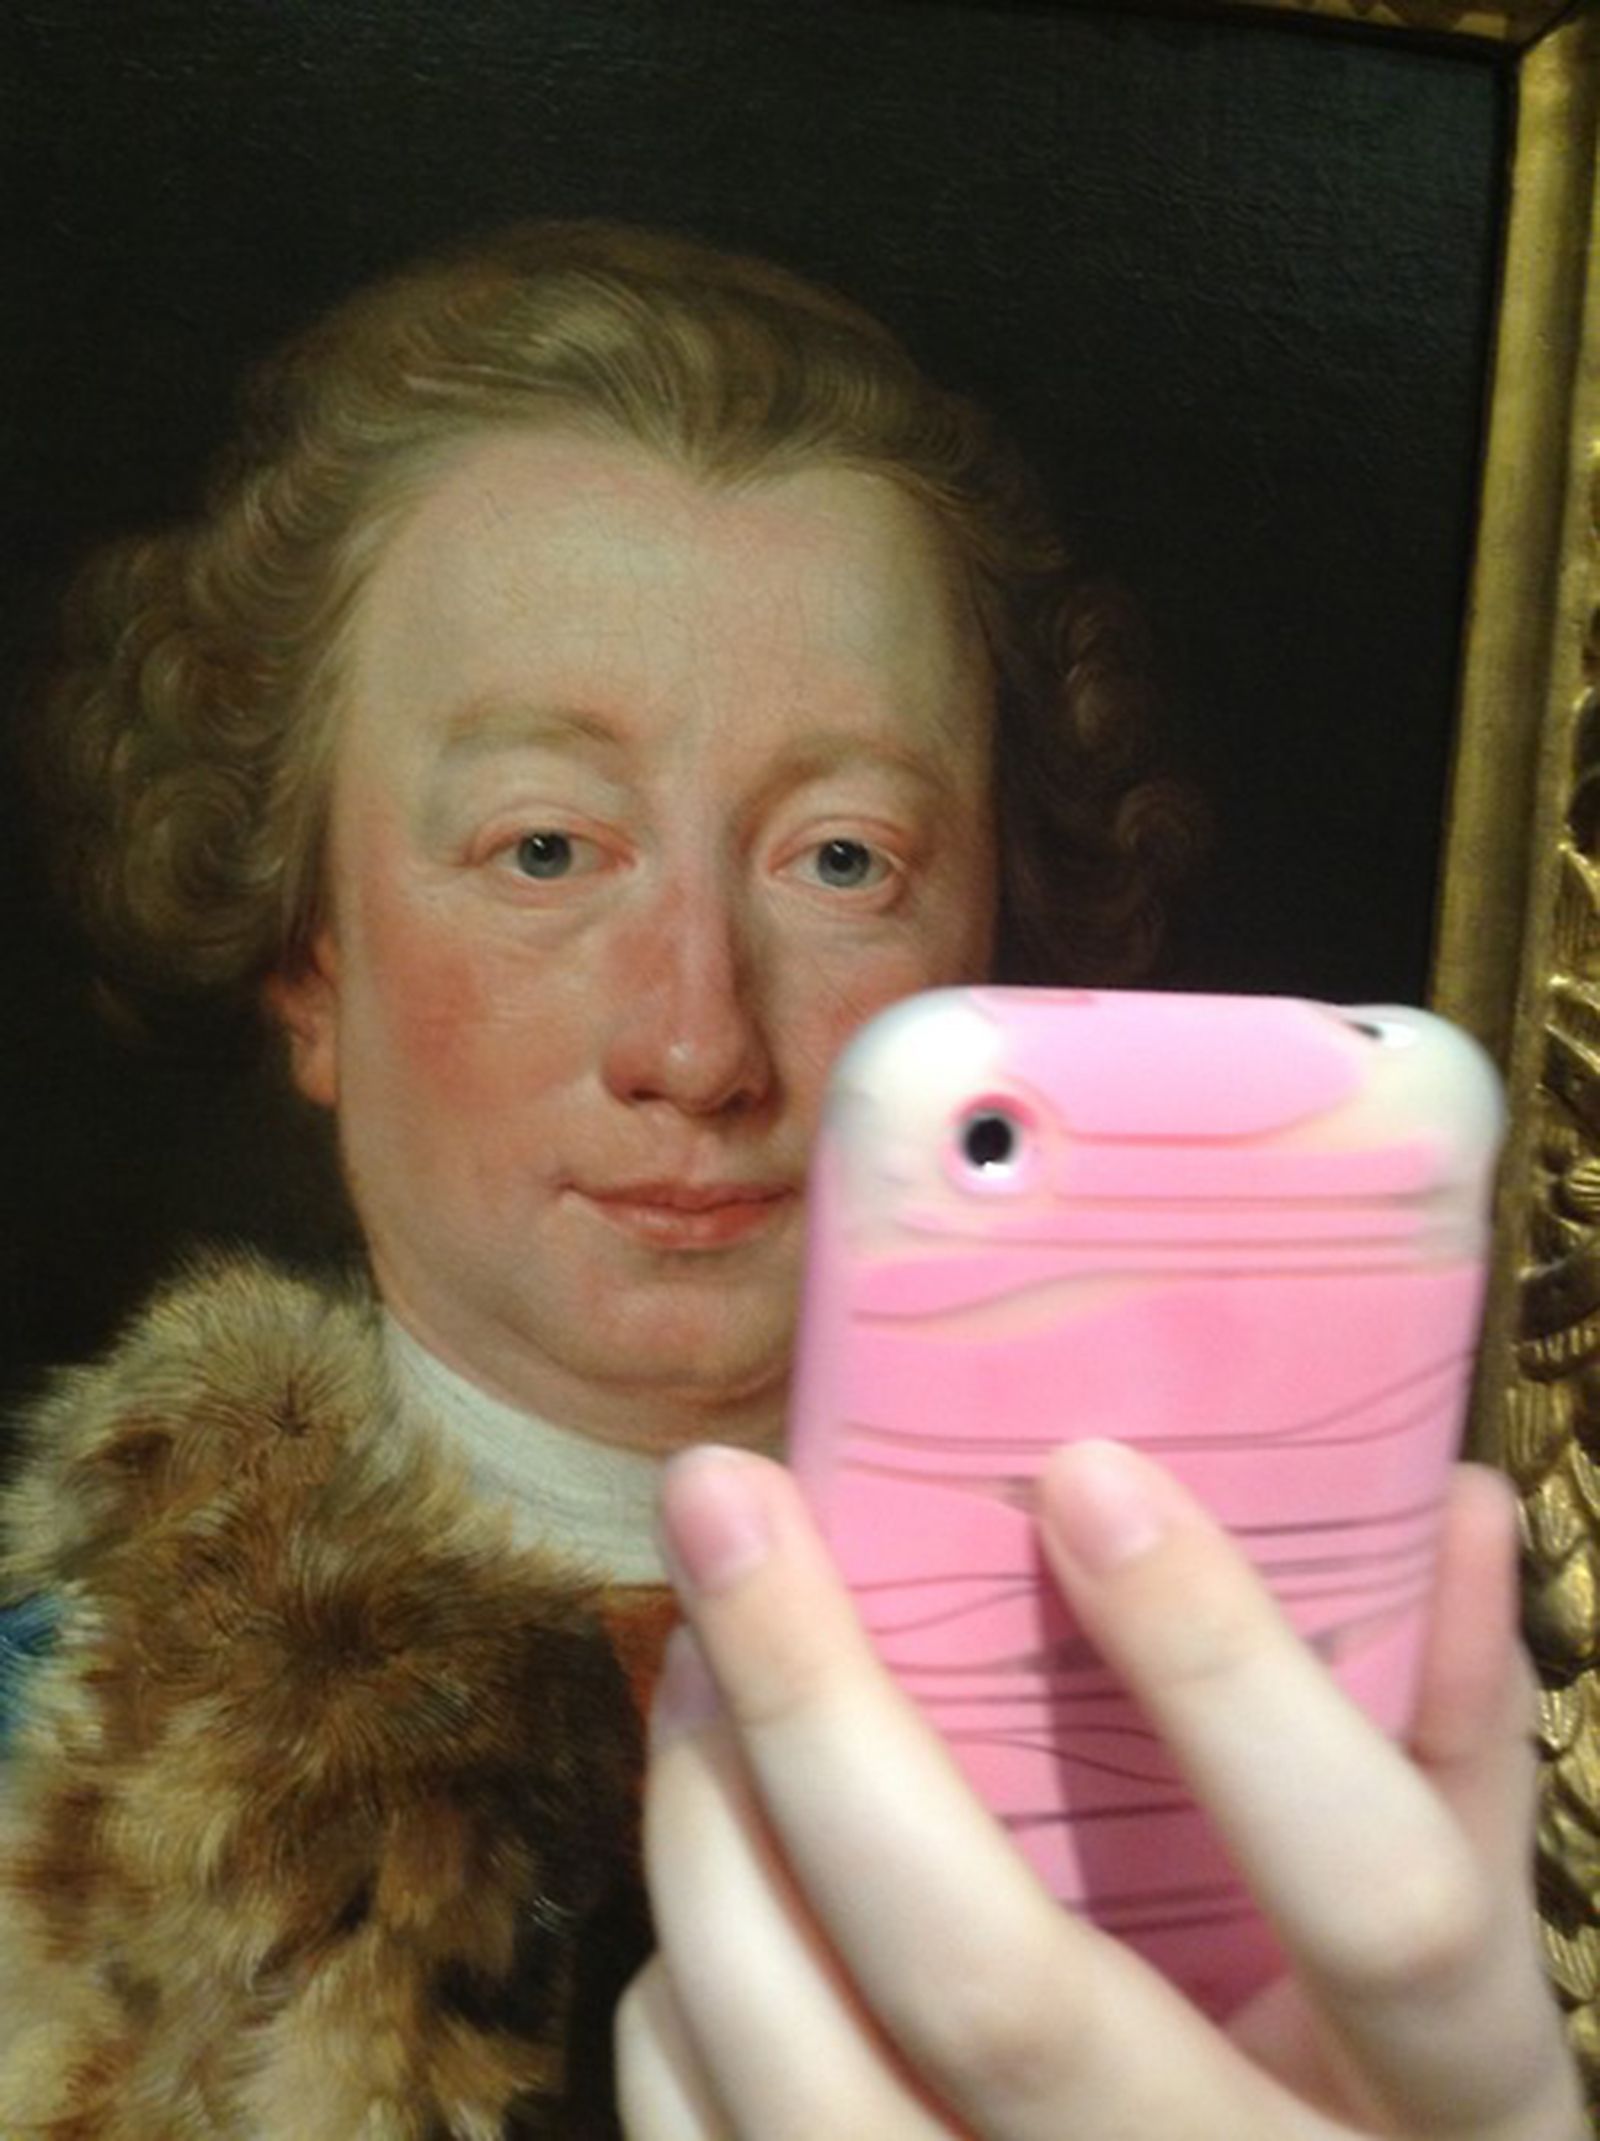 art portraits turned into smartphone selfies the photo gallery image 16